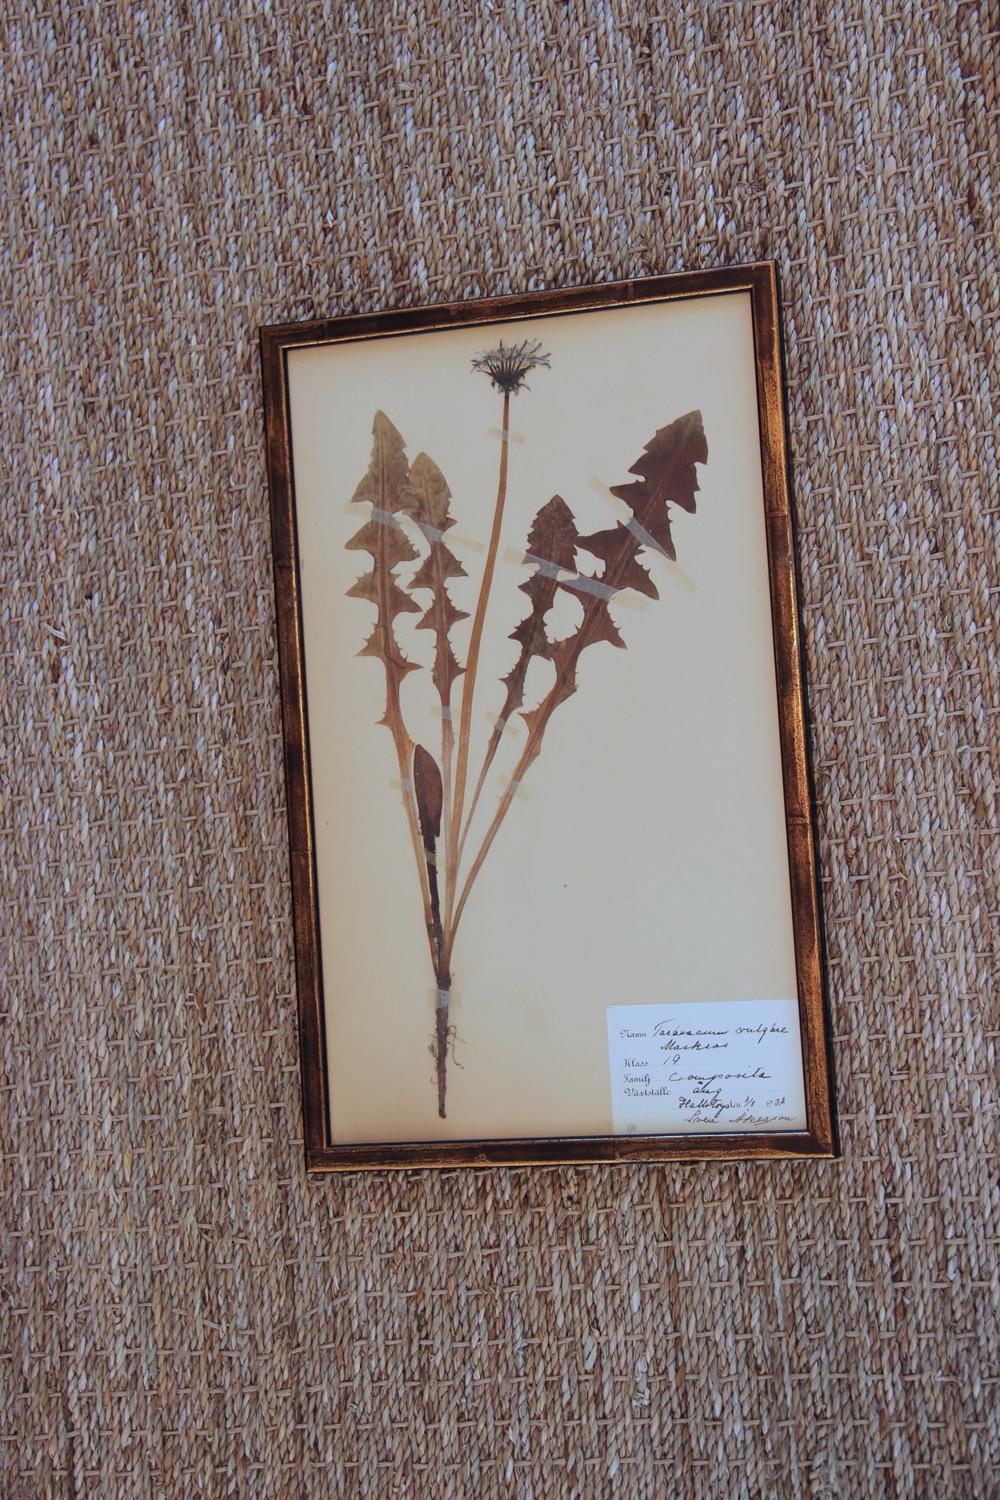 Paper Collection of Seven Framed Swedish Herbarium Studies